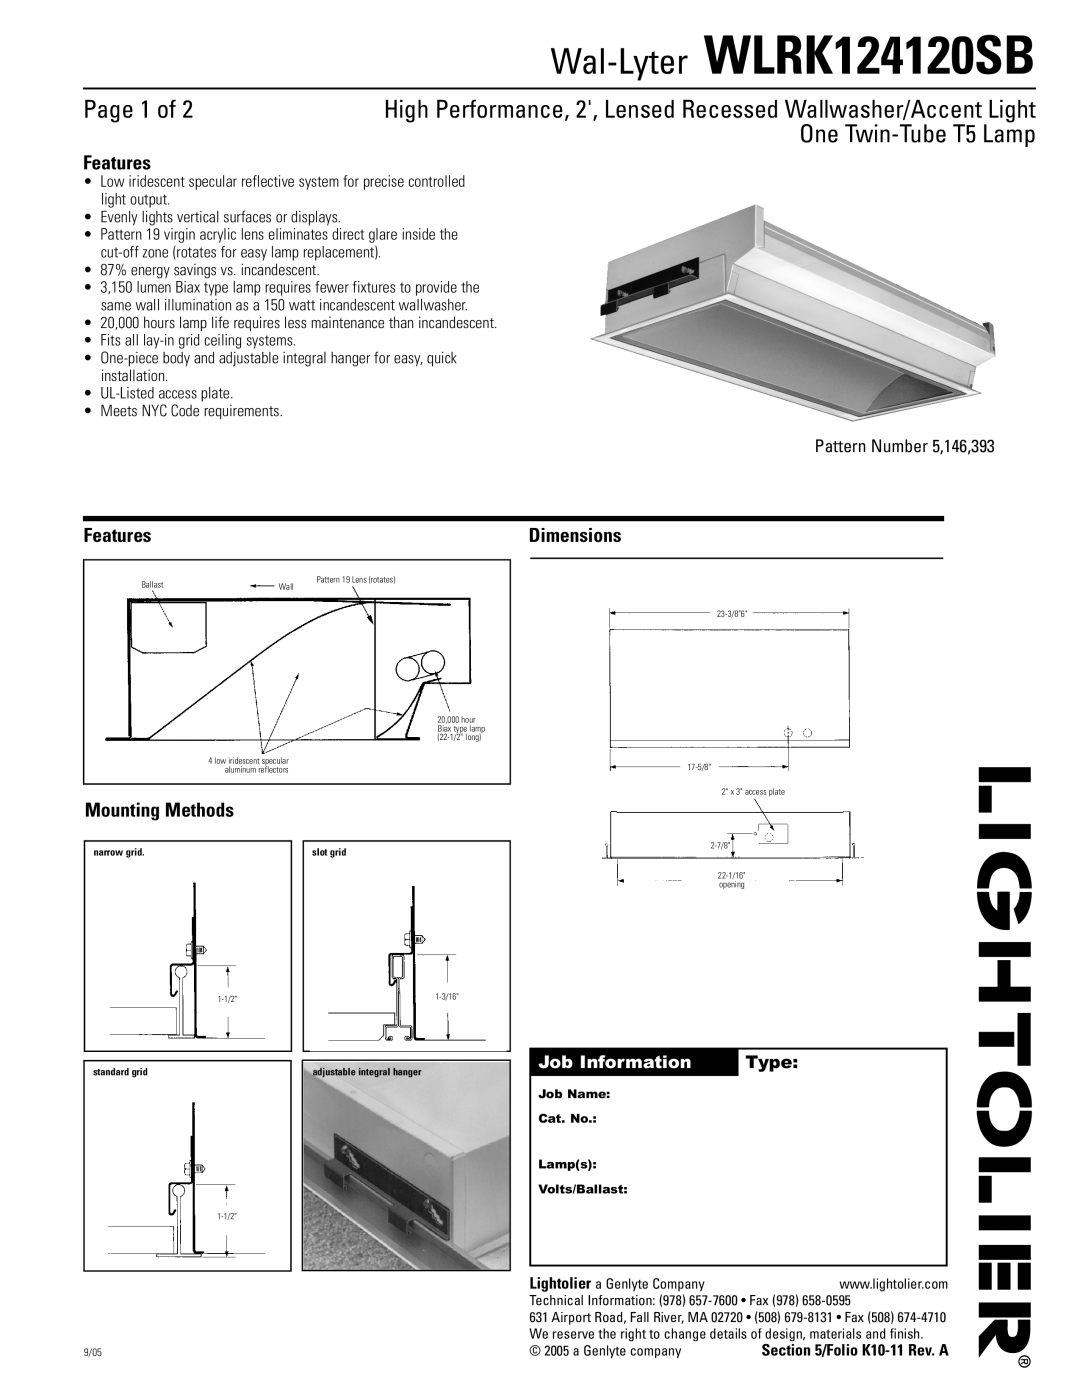 Lightolier dimensions Wal-Lyter WLRK124120SB, Page 1 of, One Twin-TubeT5 Lamp, Features, Mounting Methods, Dimensions 